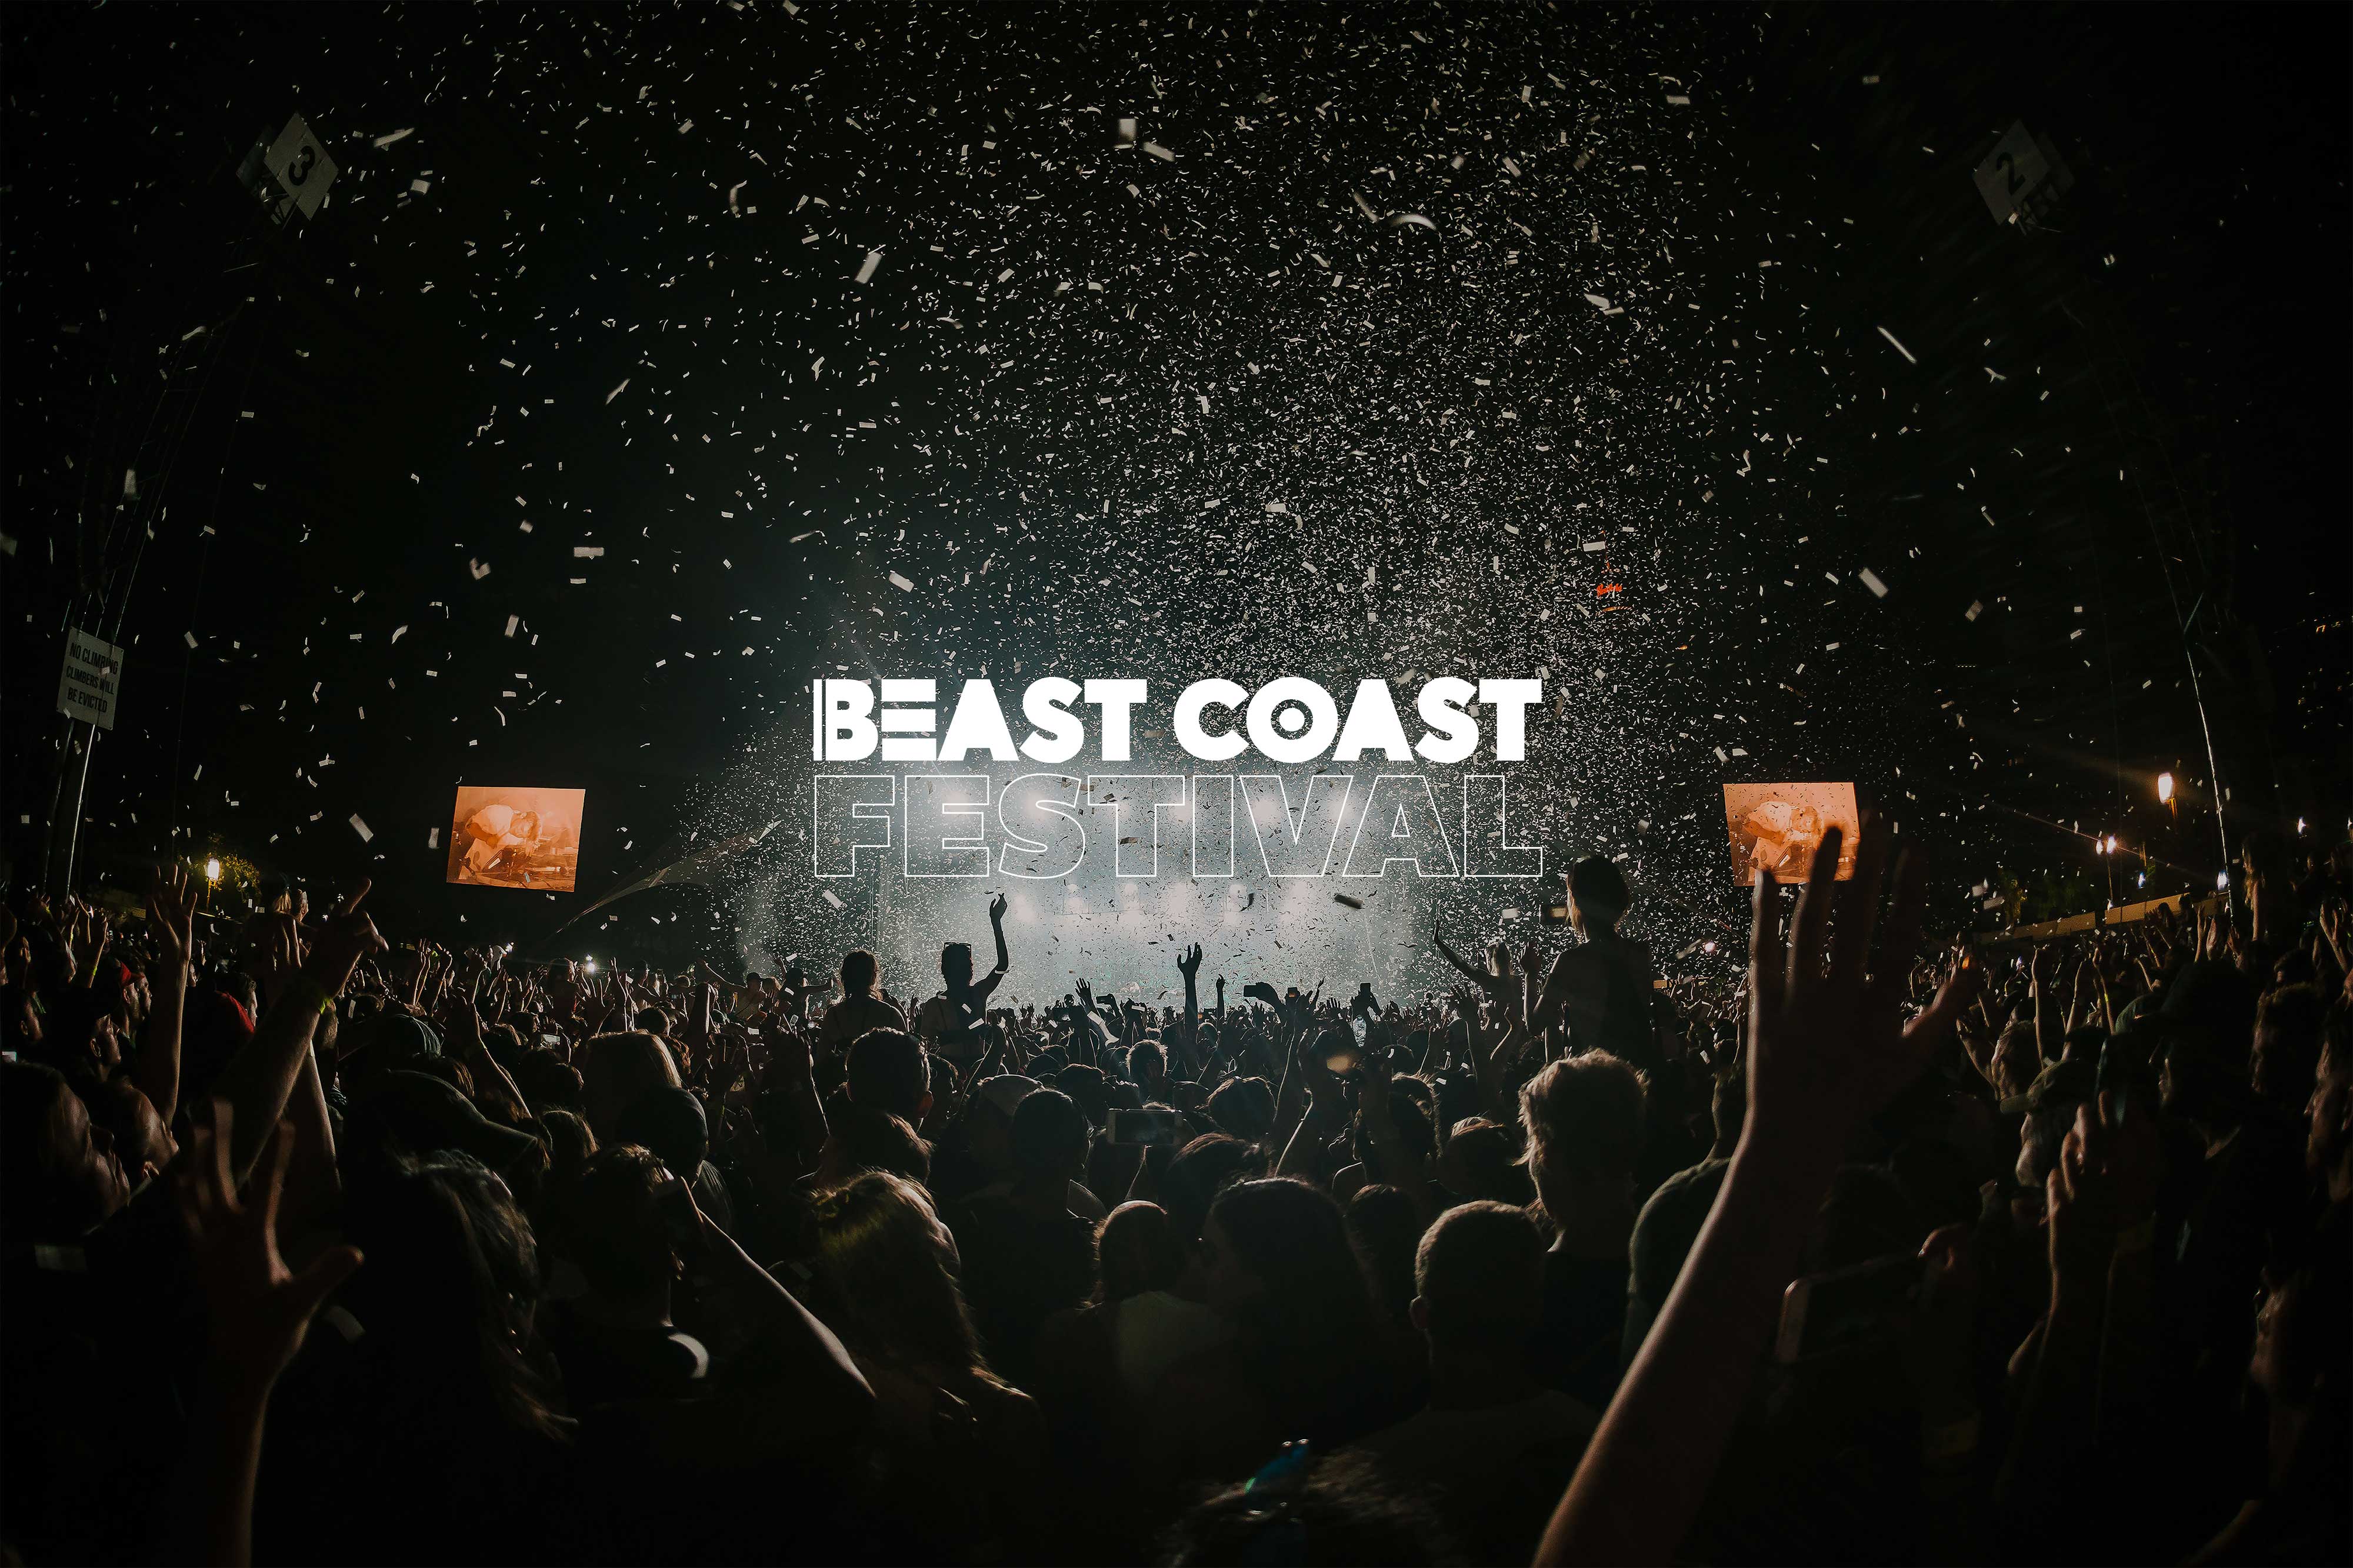 Opening image for the Project of Beast Coast Festival